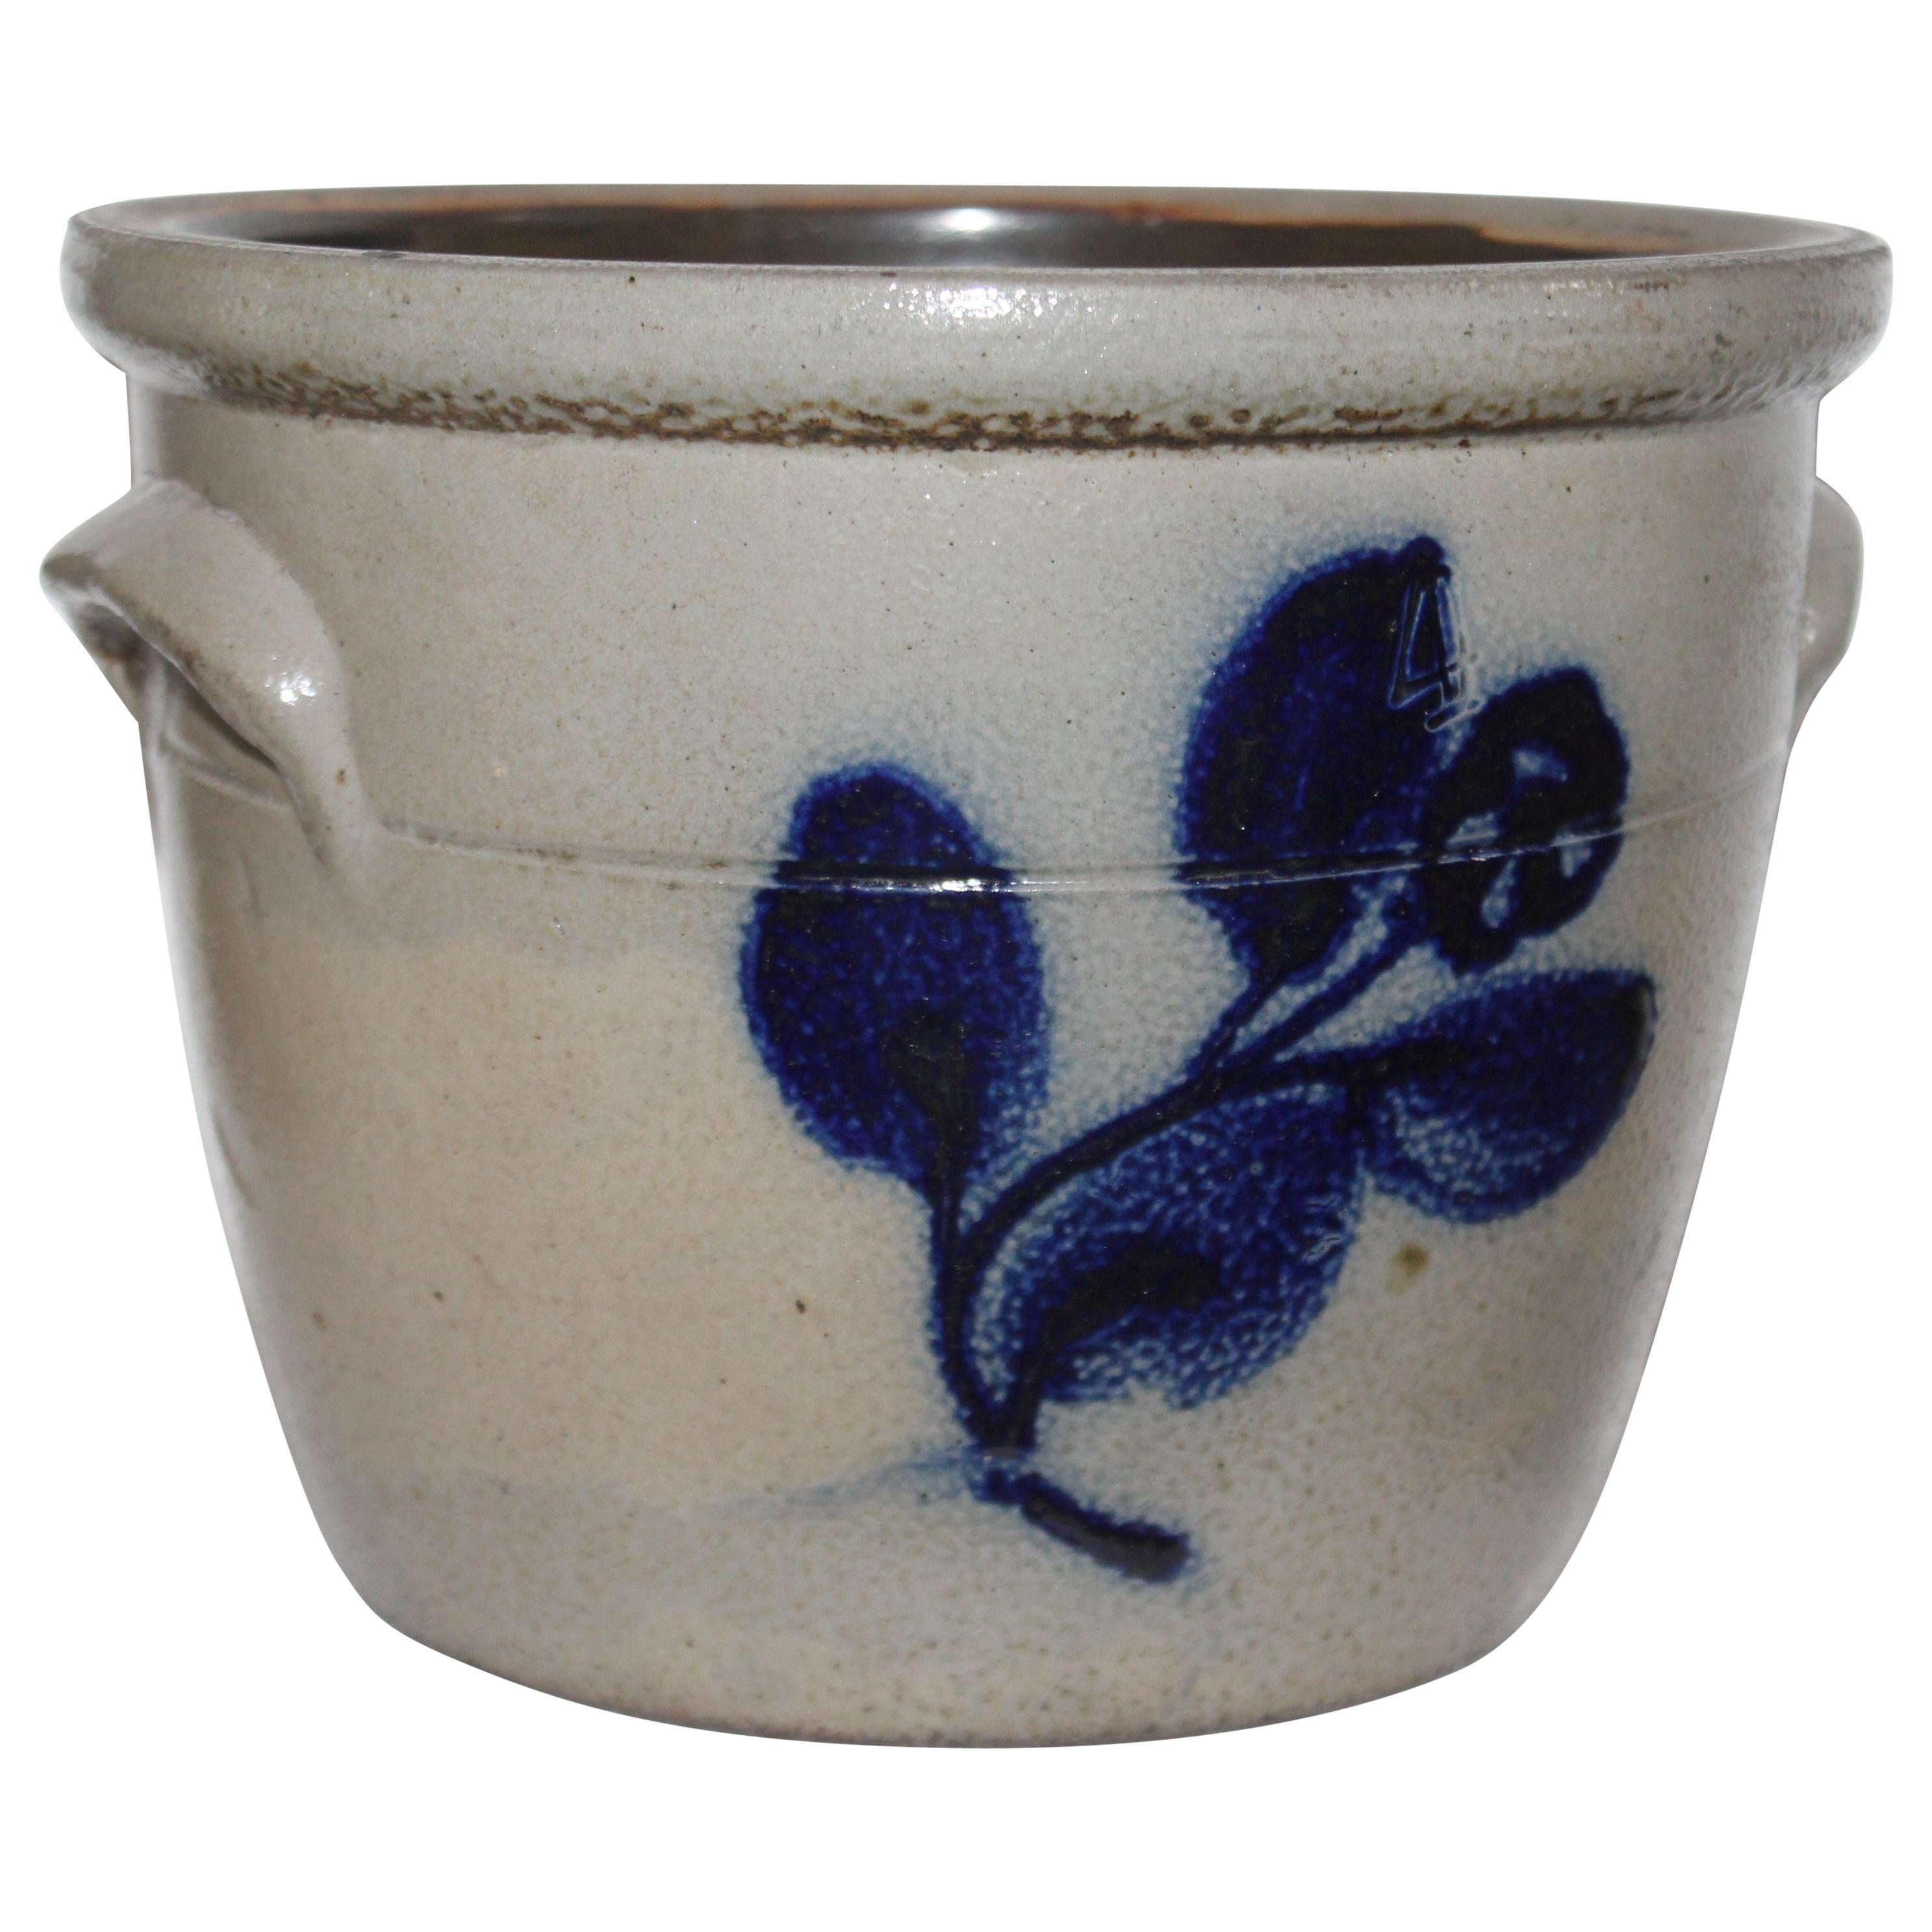 19th Century Decorated Stoneware Crock with Handles